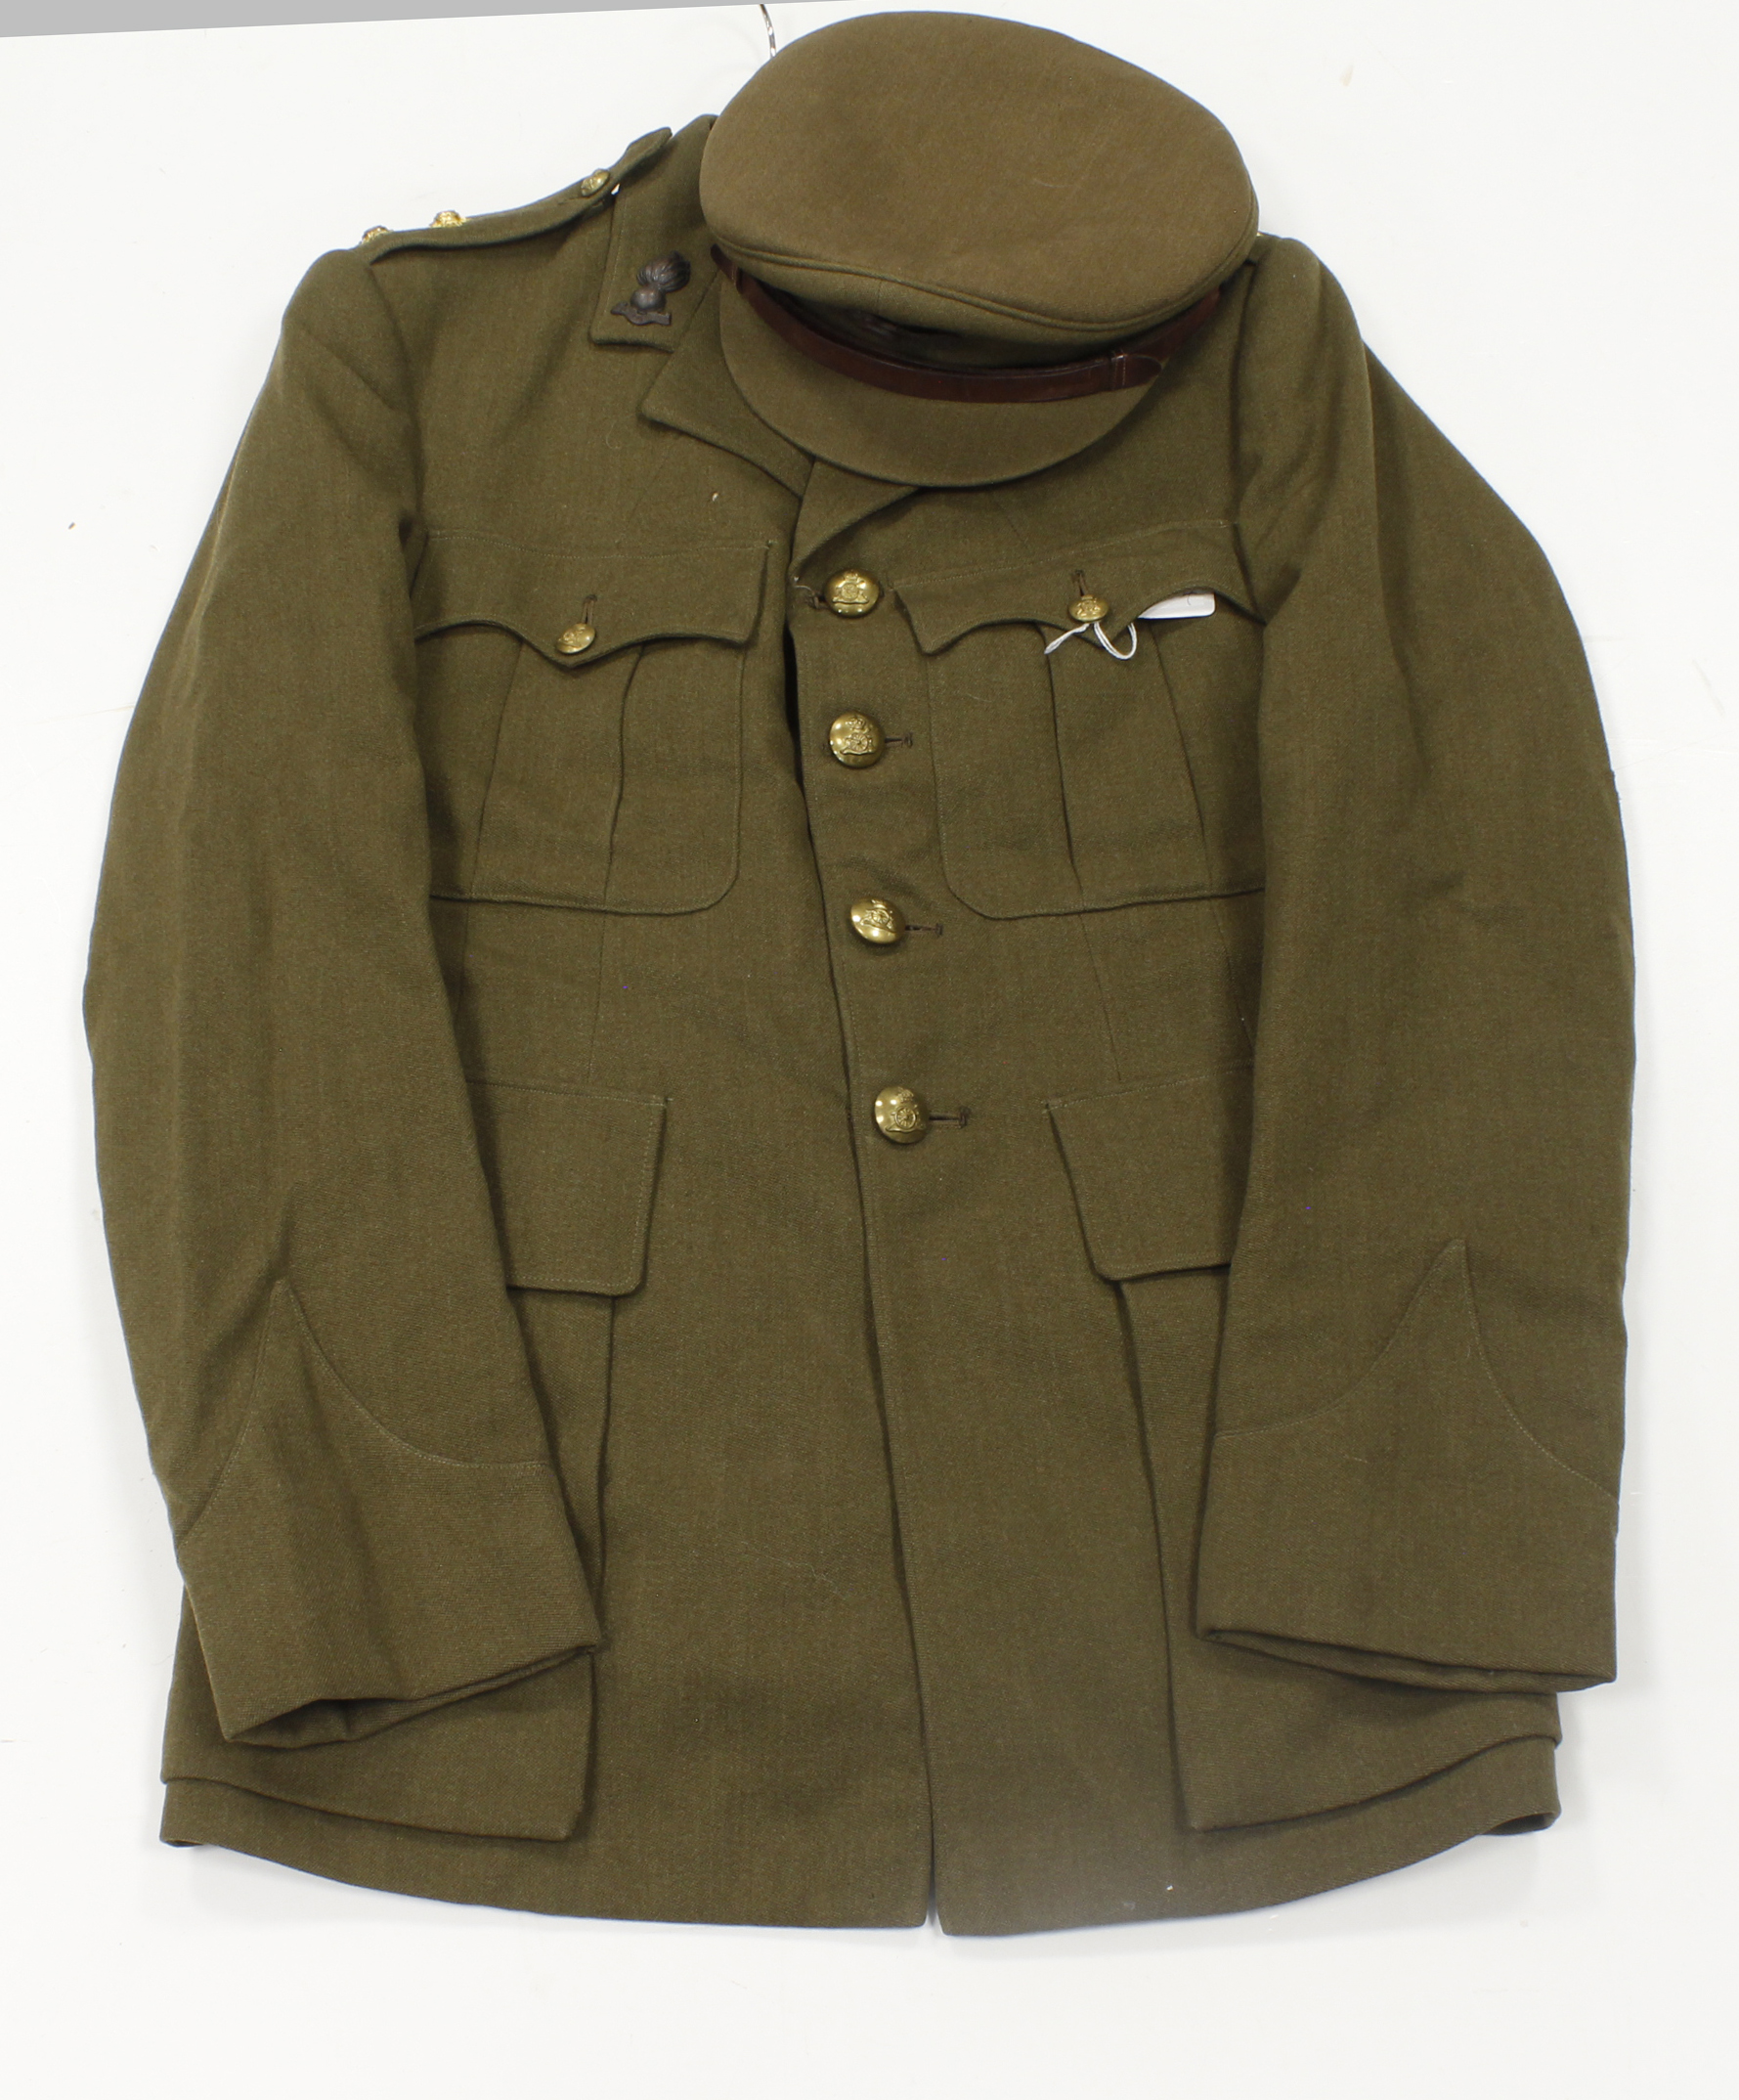 Royal Artillery Lieut uniform with Kings crown badges complete with jacket trousers and hat.